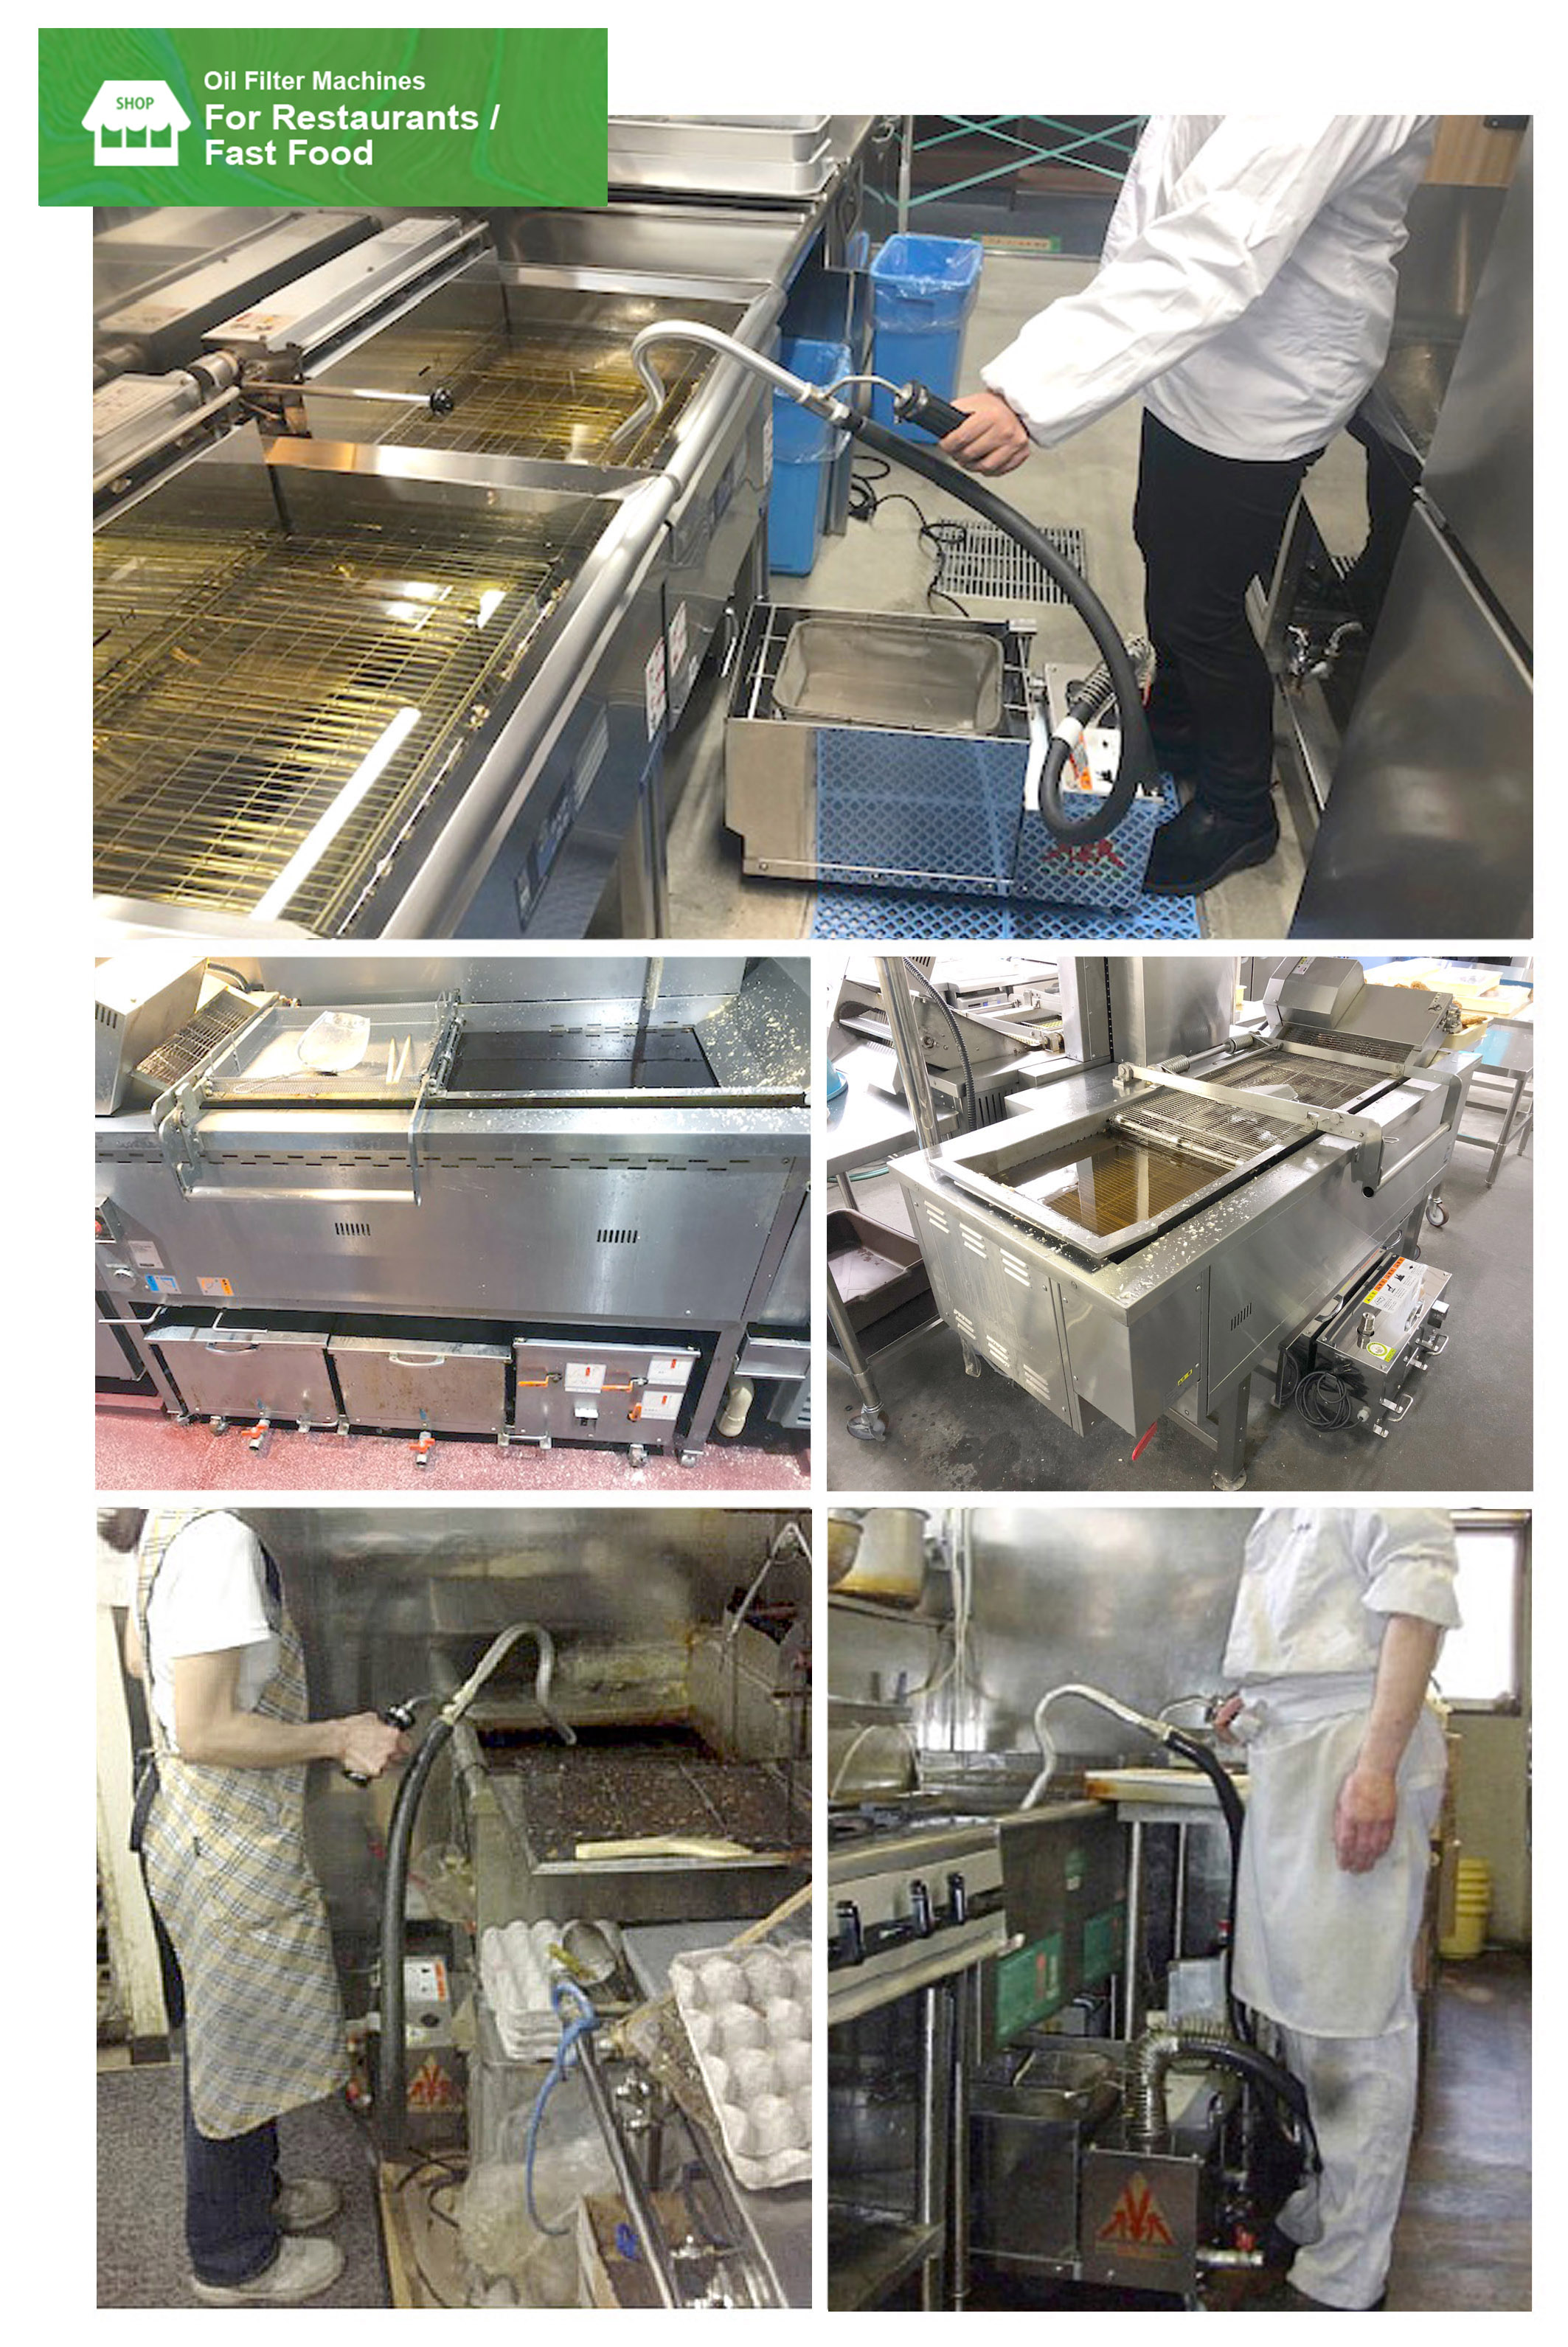 Oil Filter Machines
( For Restaurants / Fast Food )